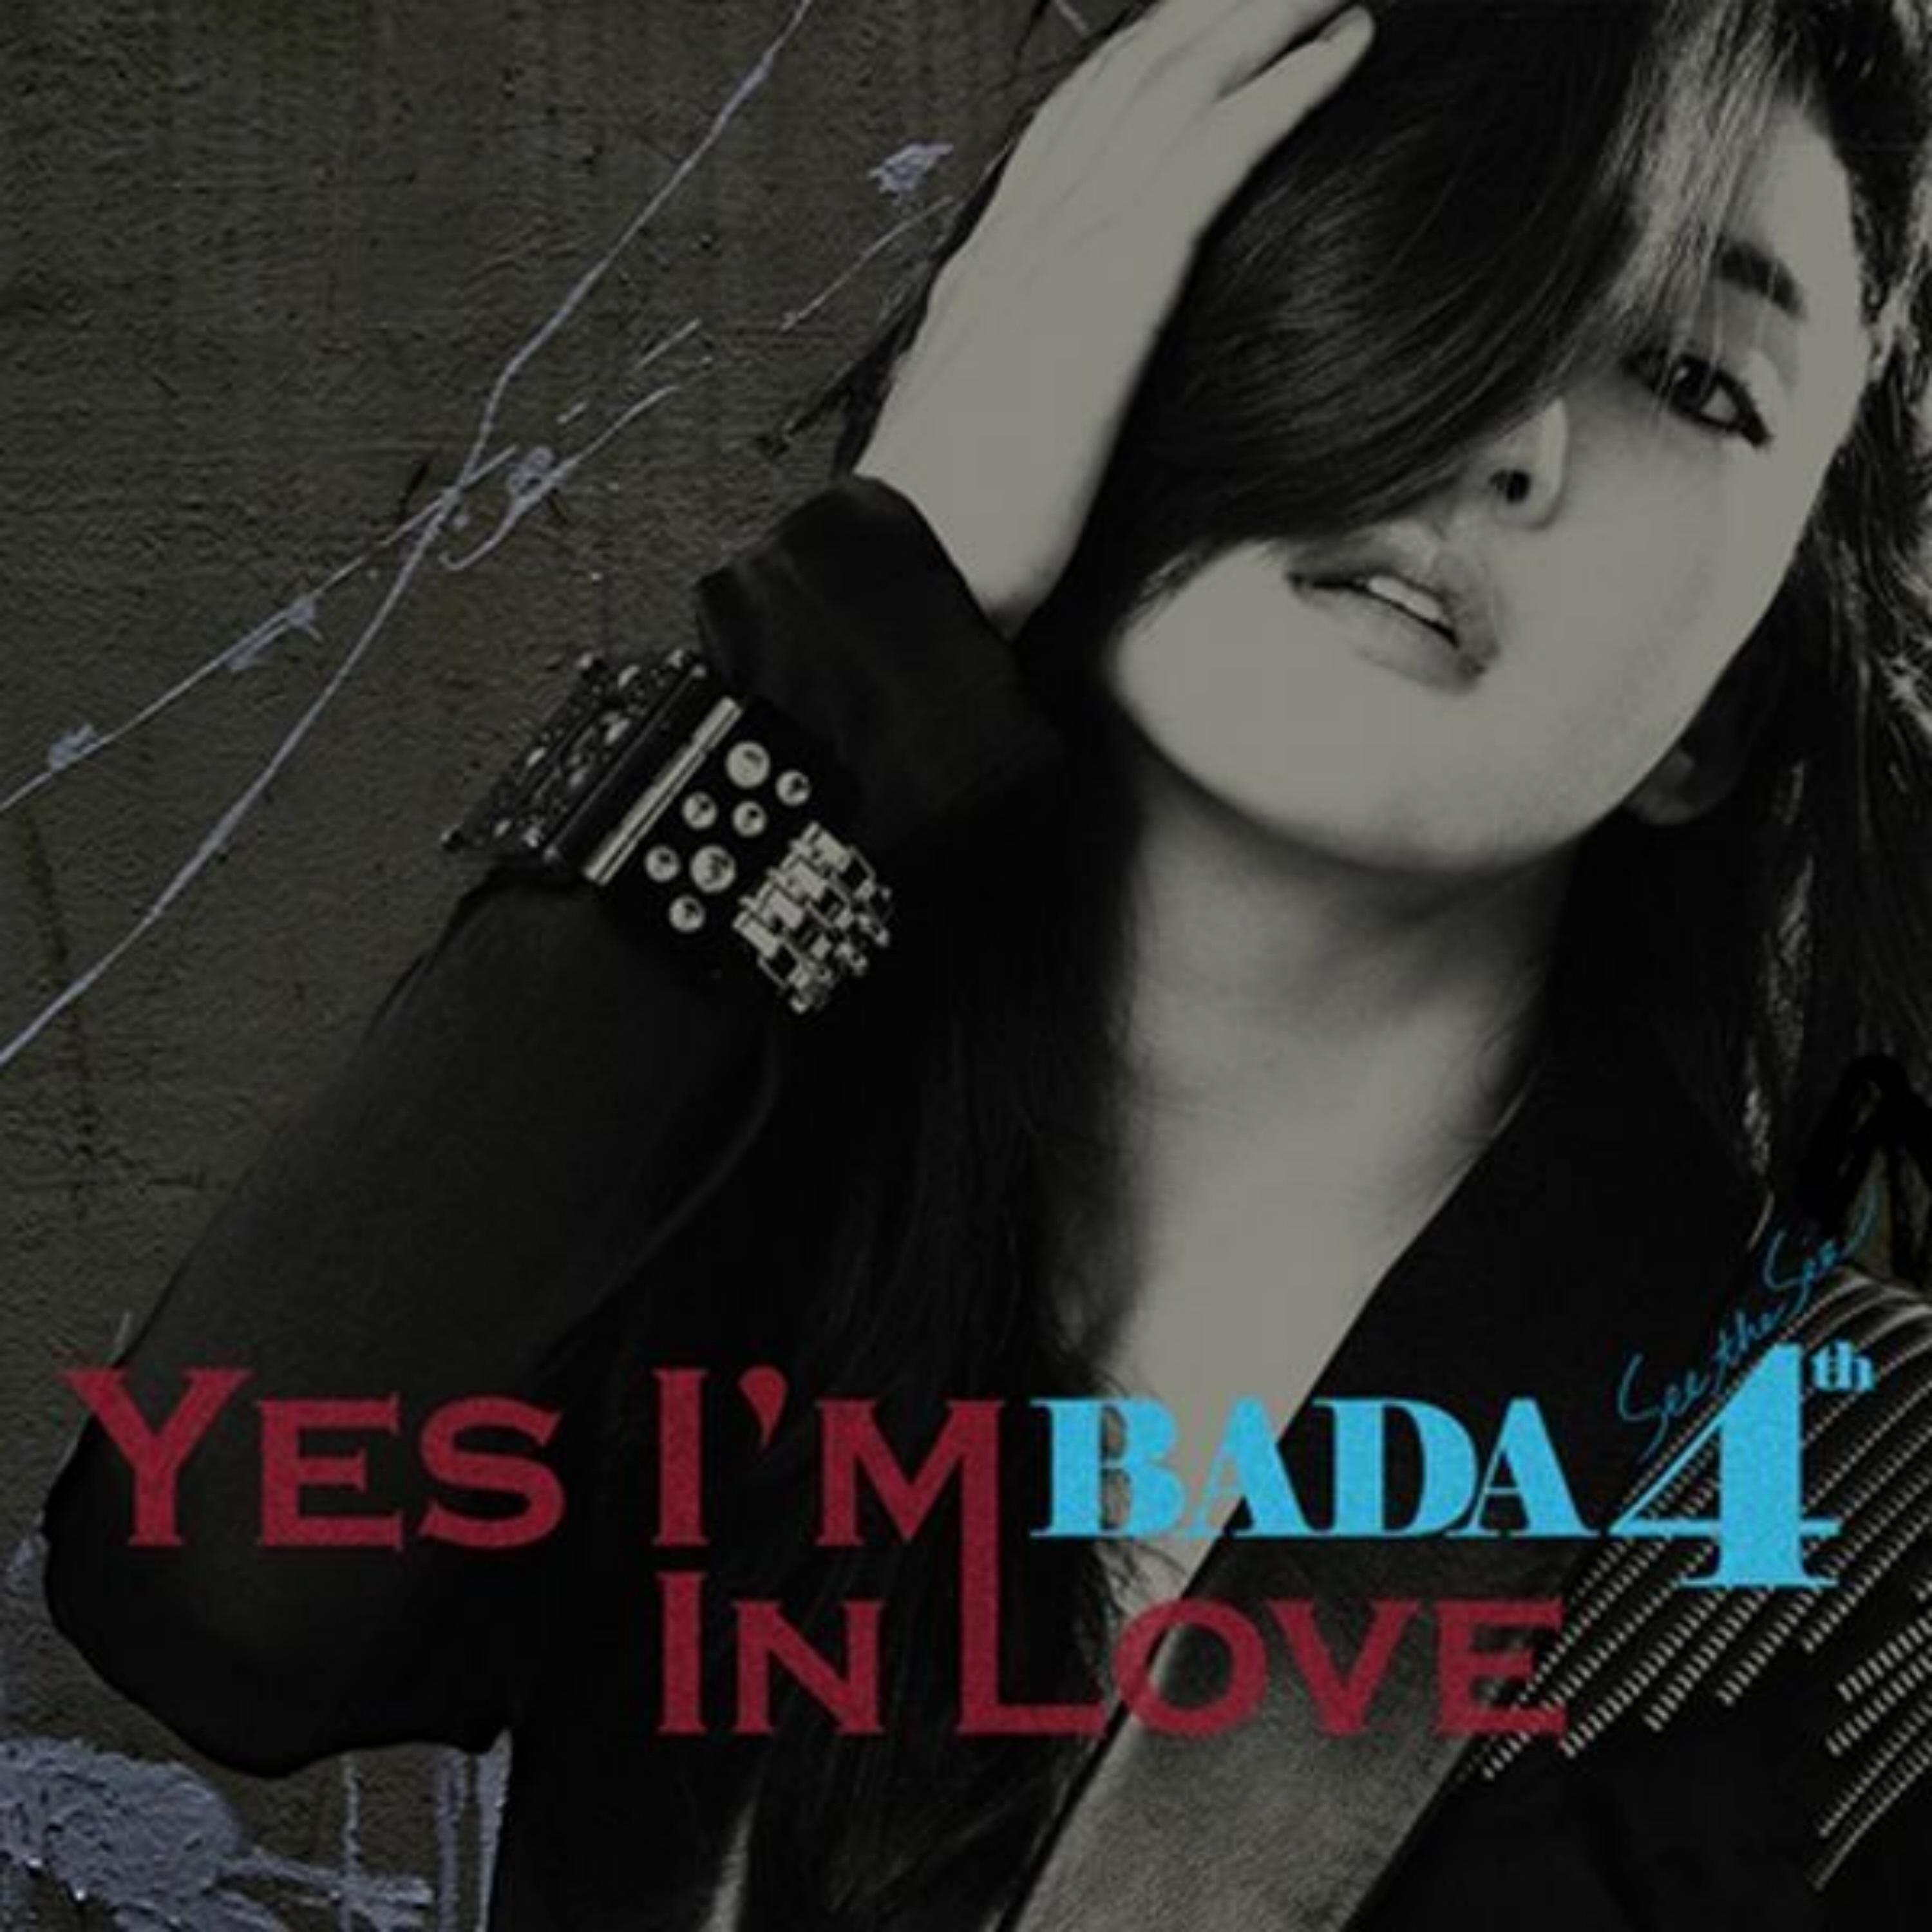 Bada - Yes I'm In Love (Feat. 2PM 택연)